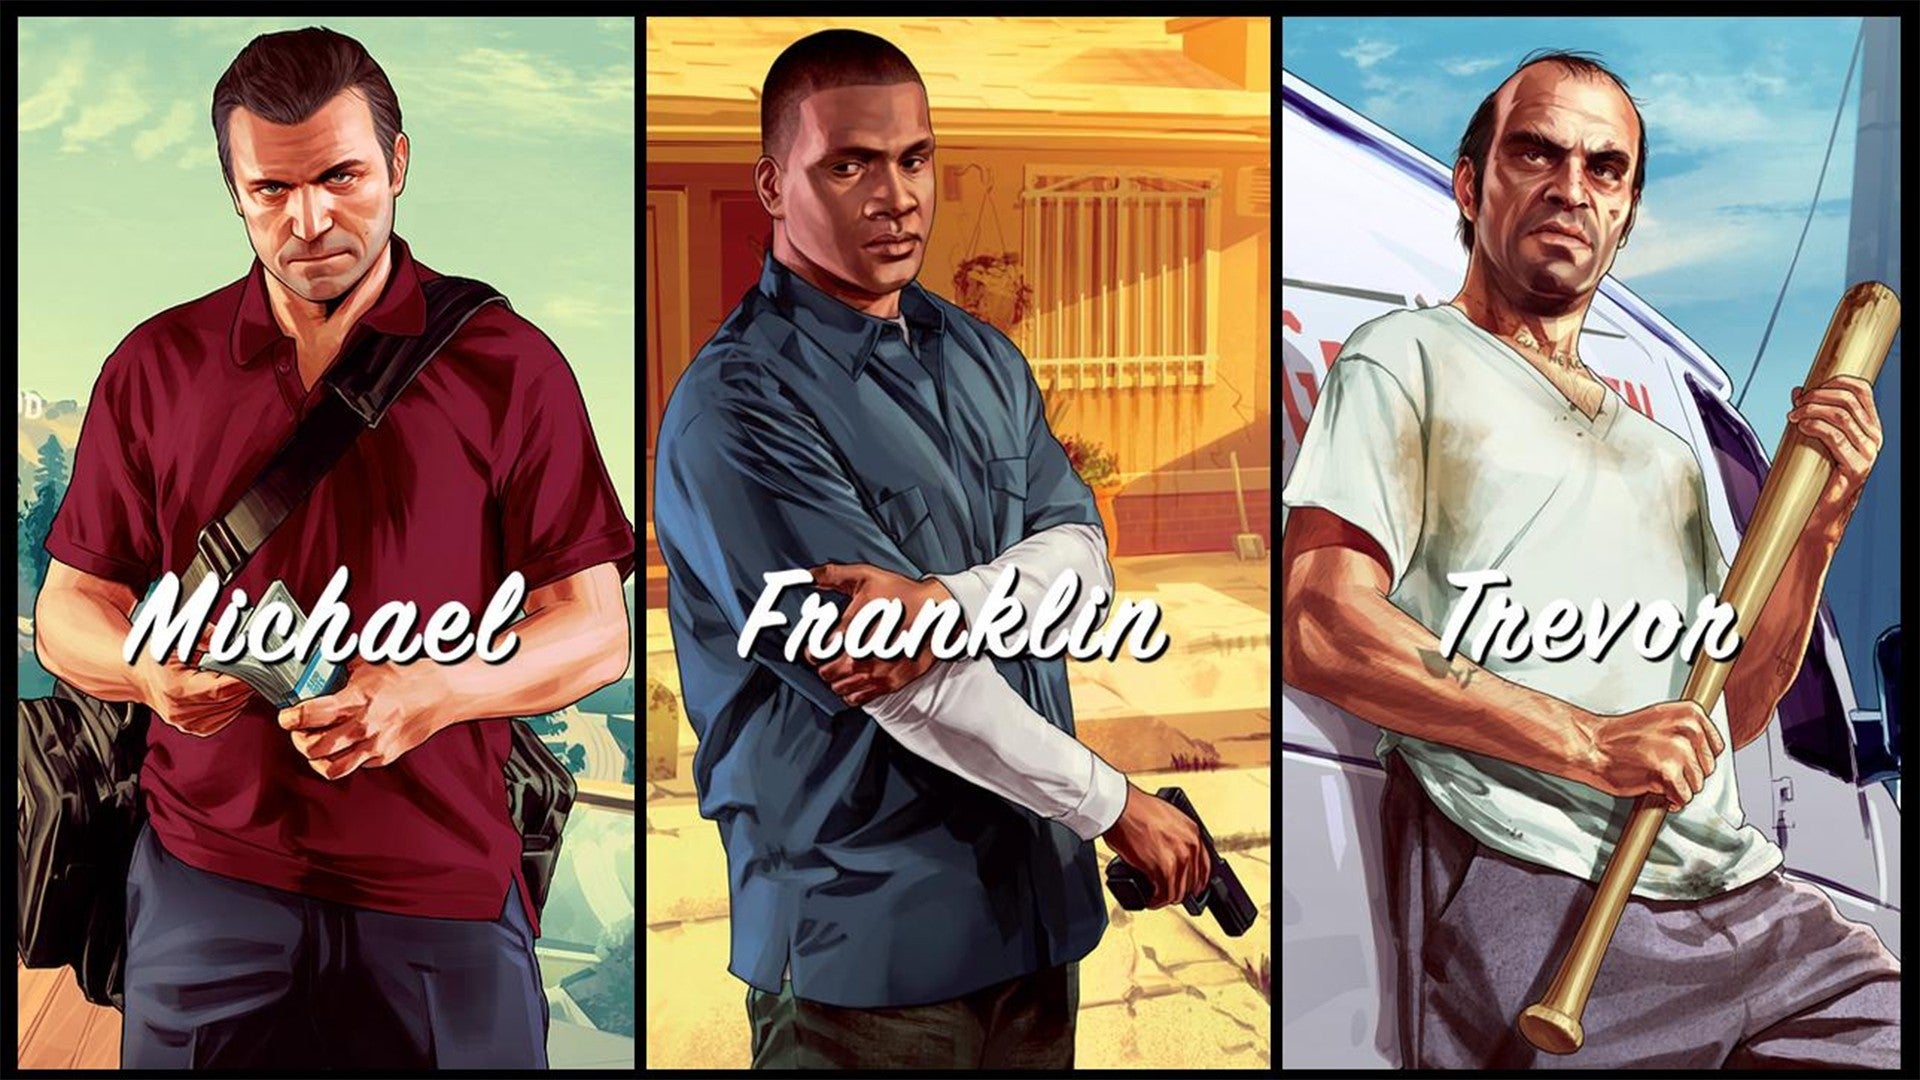 Character art for GTA V's three main protagonists